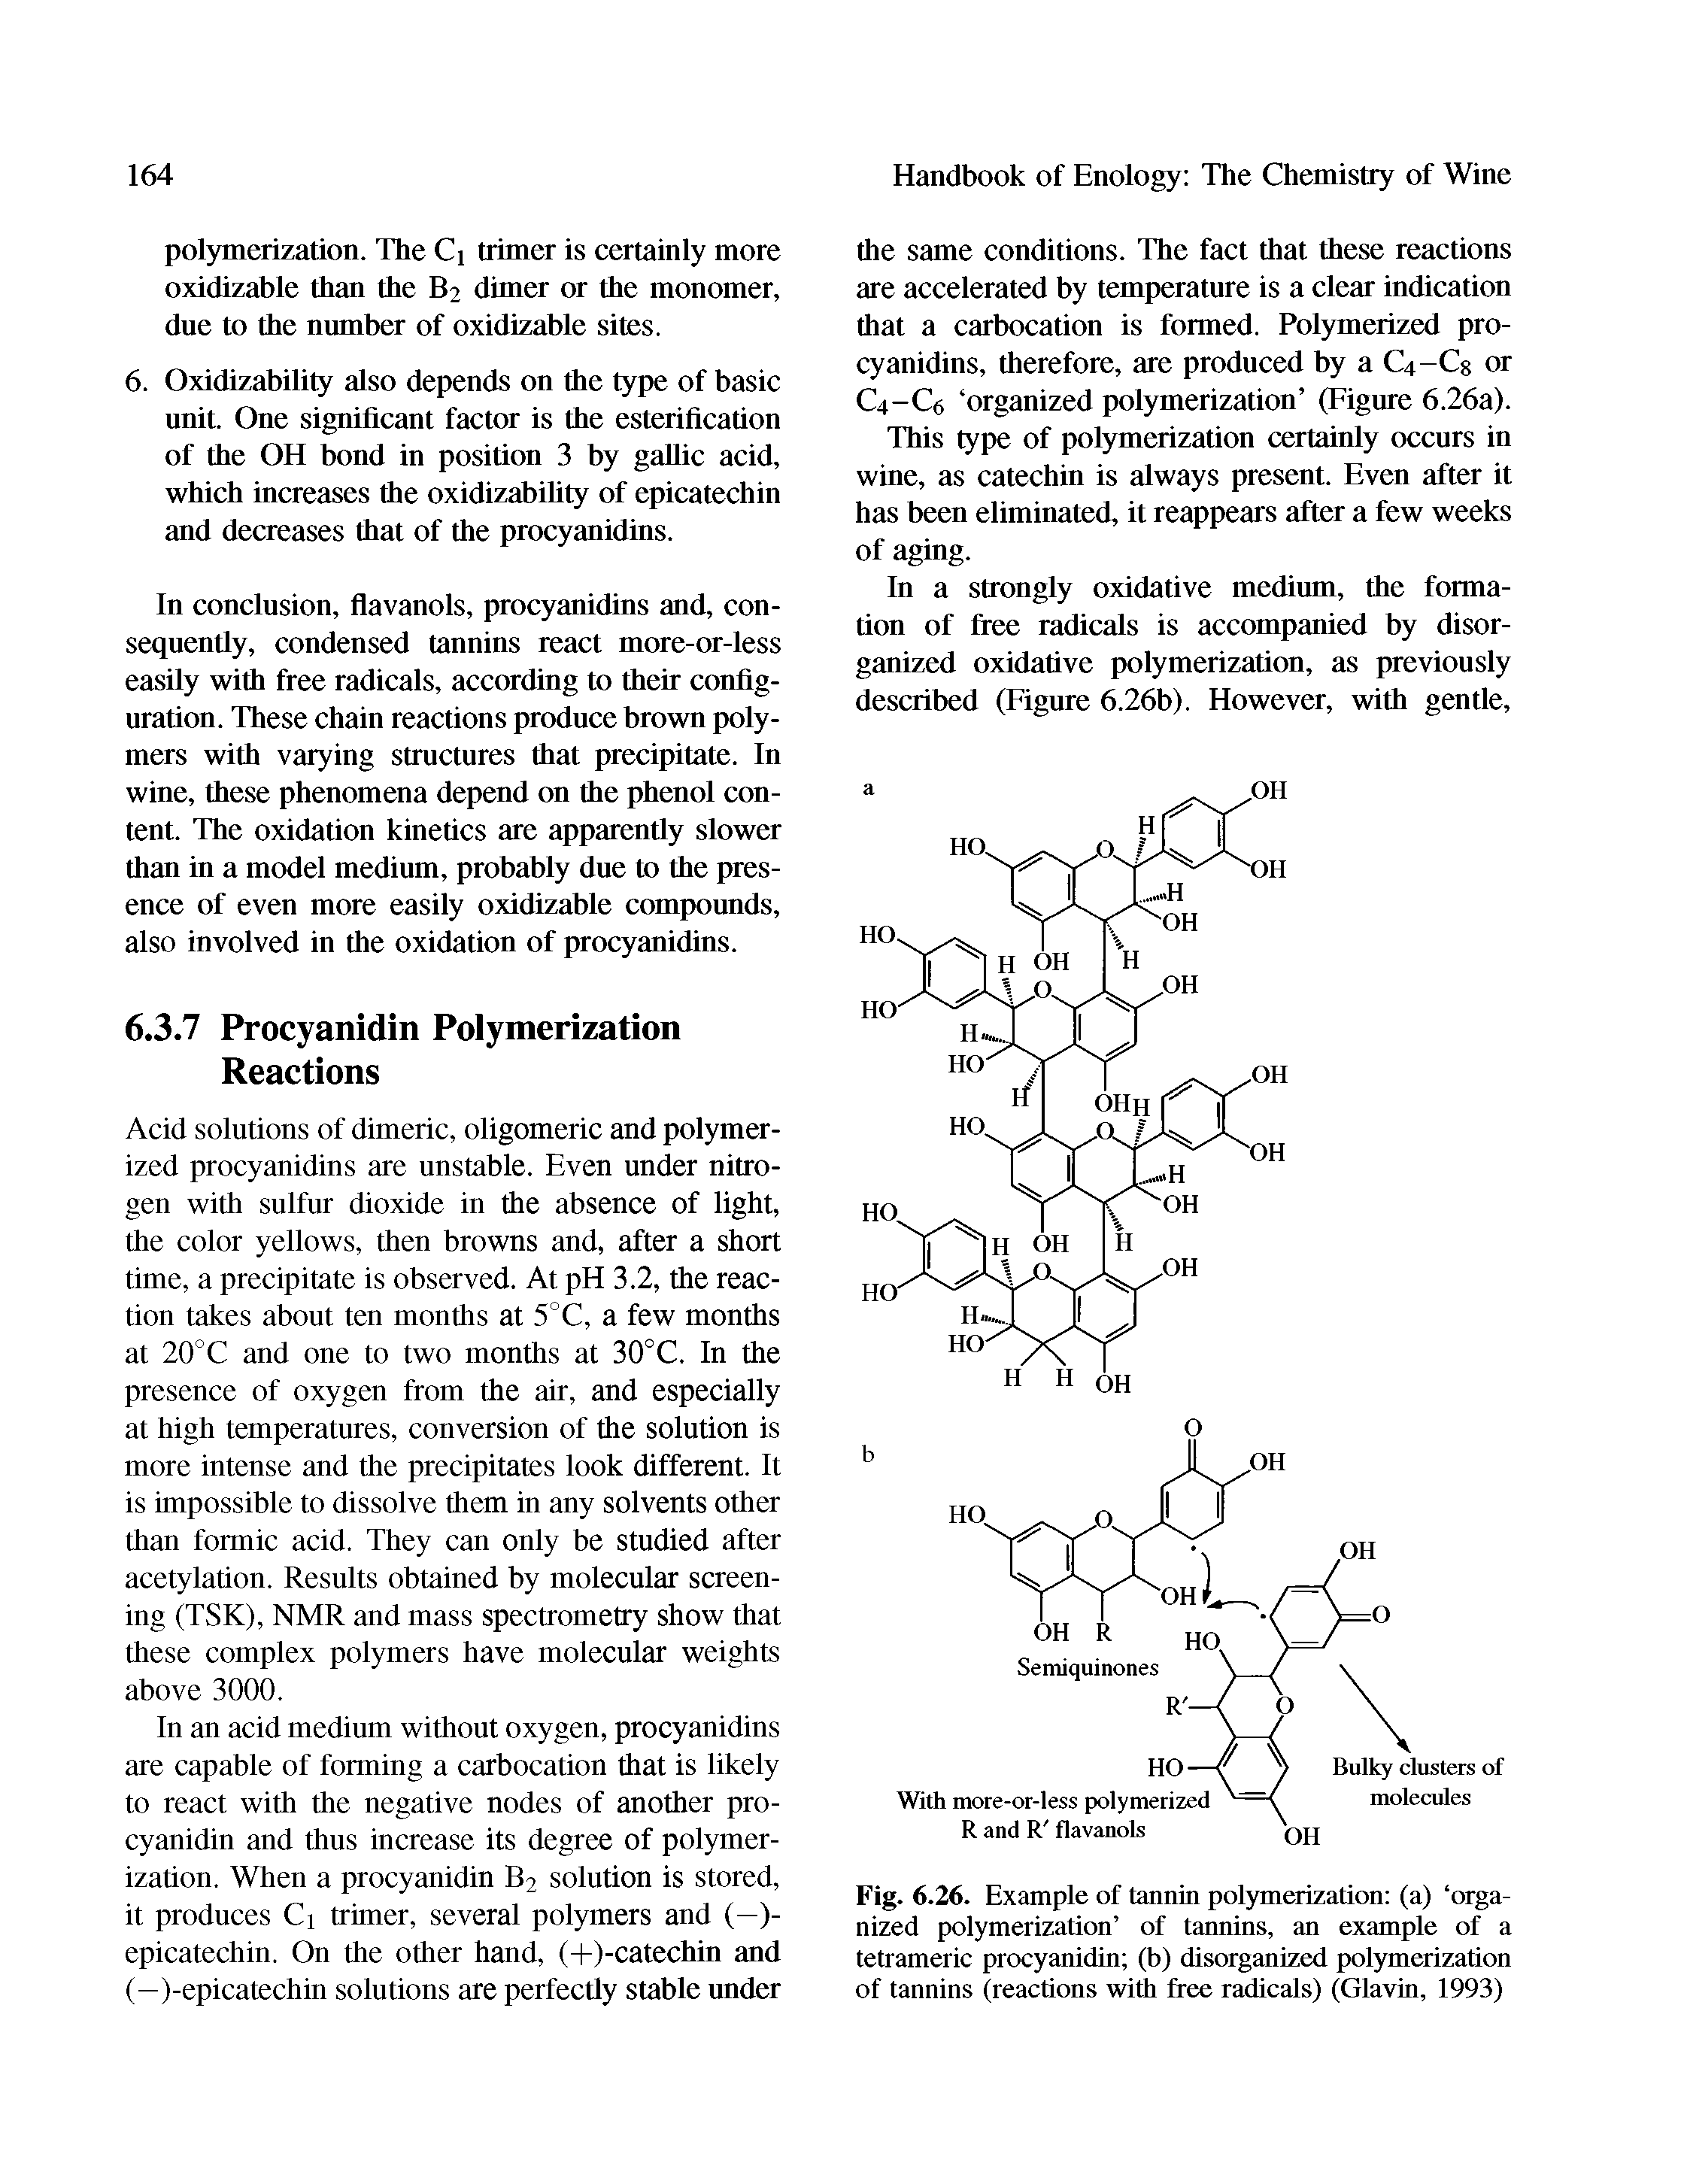 Fig. 6.26. Example of tannin polymerization (a) organized polymerization of tannins, an example of a tetrameric procyanidin (b) disorganized polymerization of tannins (reactions with free radicals) (Glavin, 1993)...